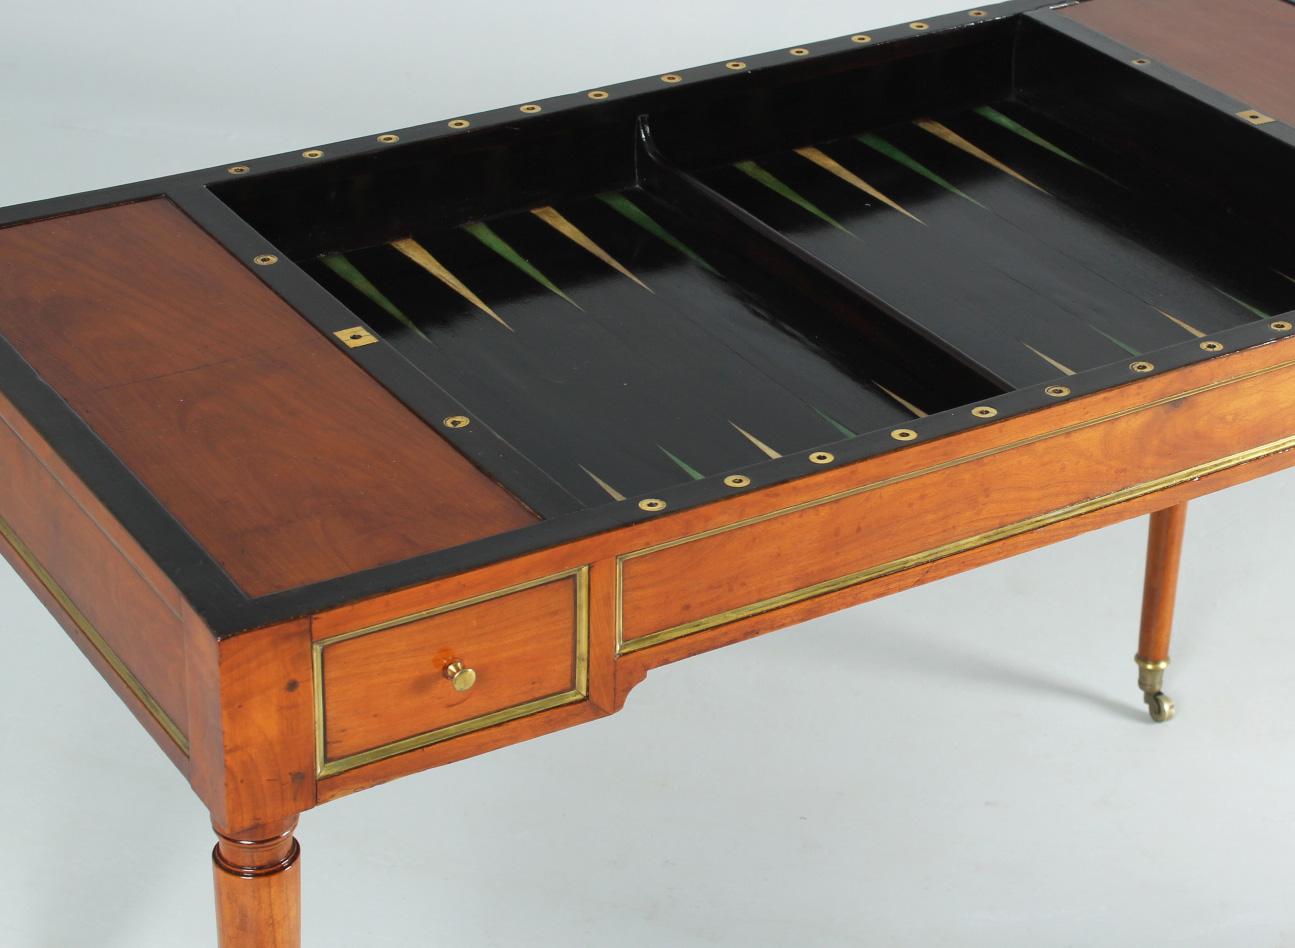 French Antique Backgammon Table, so-called Tric Trac Table, Cherry, France, Louis XVI